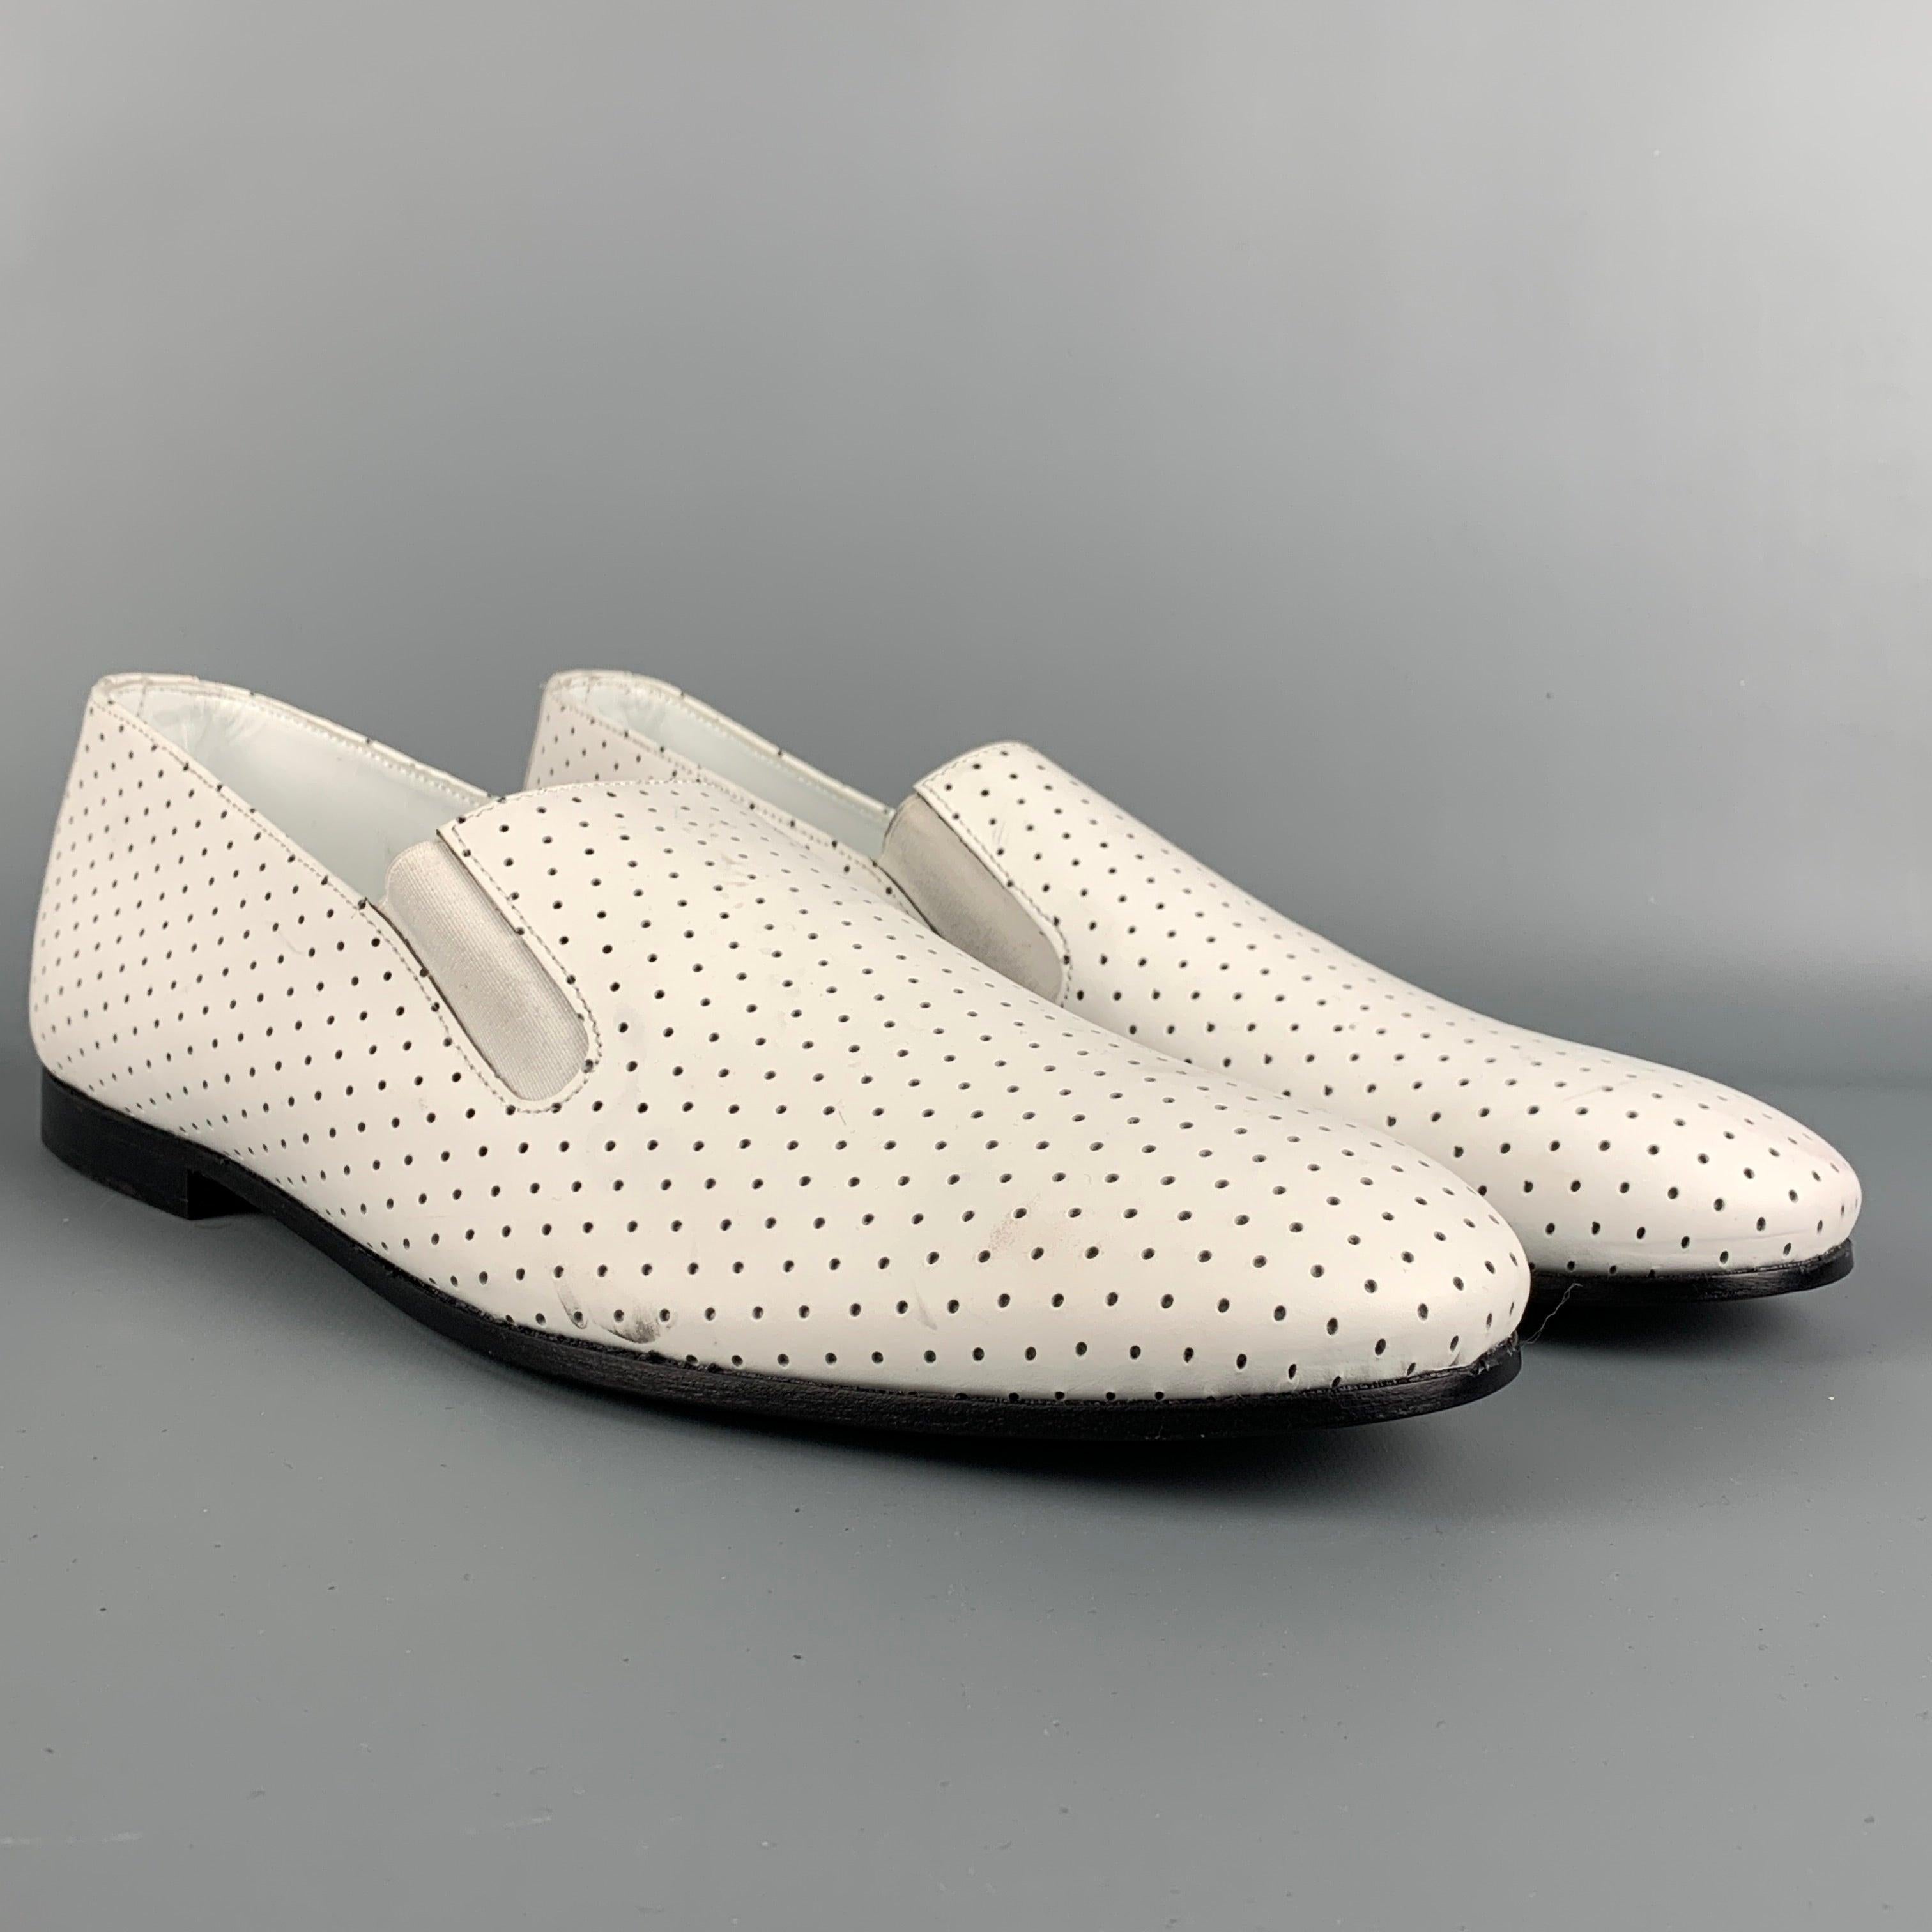 PAUL SMITH loafers comes in a white perforated leather featuring a slip on style and a round toe. Made in Italy.
Very Good
Pre-Owned Condition. 

Marked:   10Outsole: 11.5 inches  x 4 inches 
  
  
 
Reference: 113835
Category: Loafers
More Details
